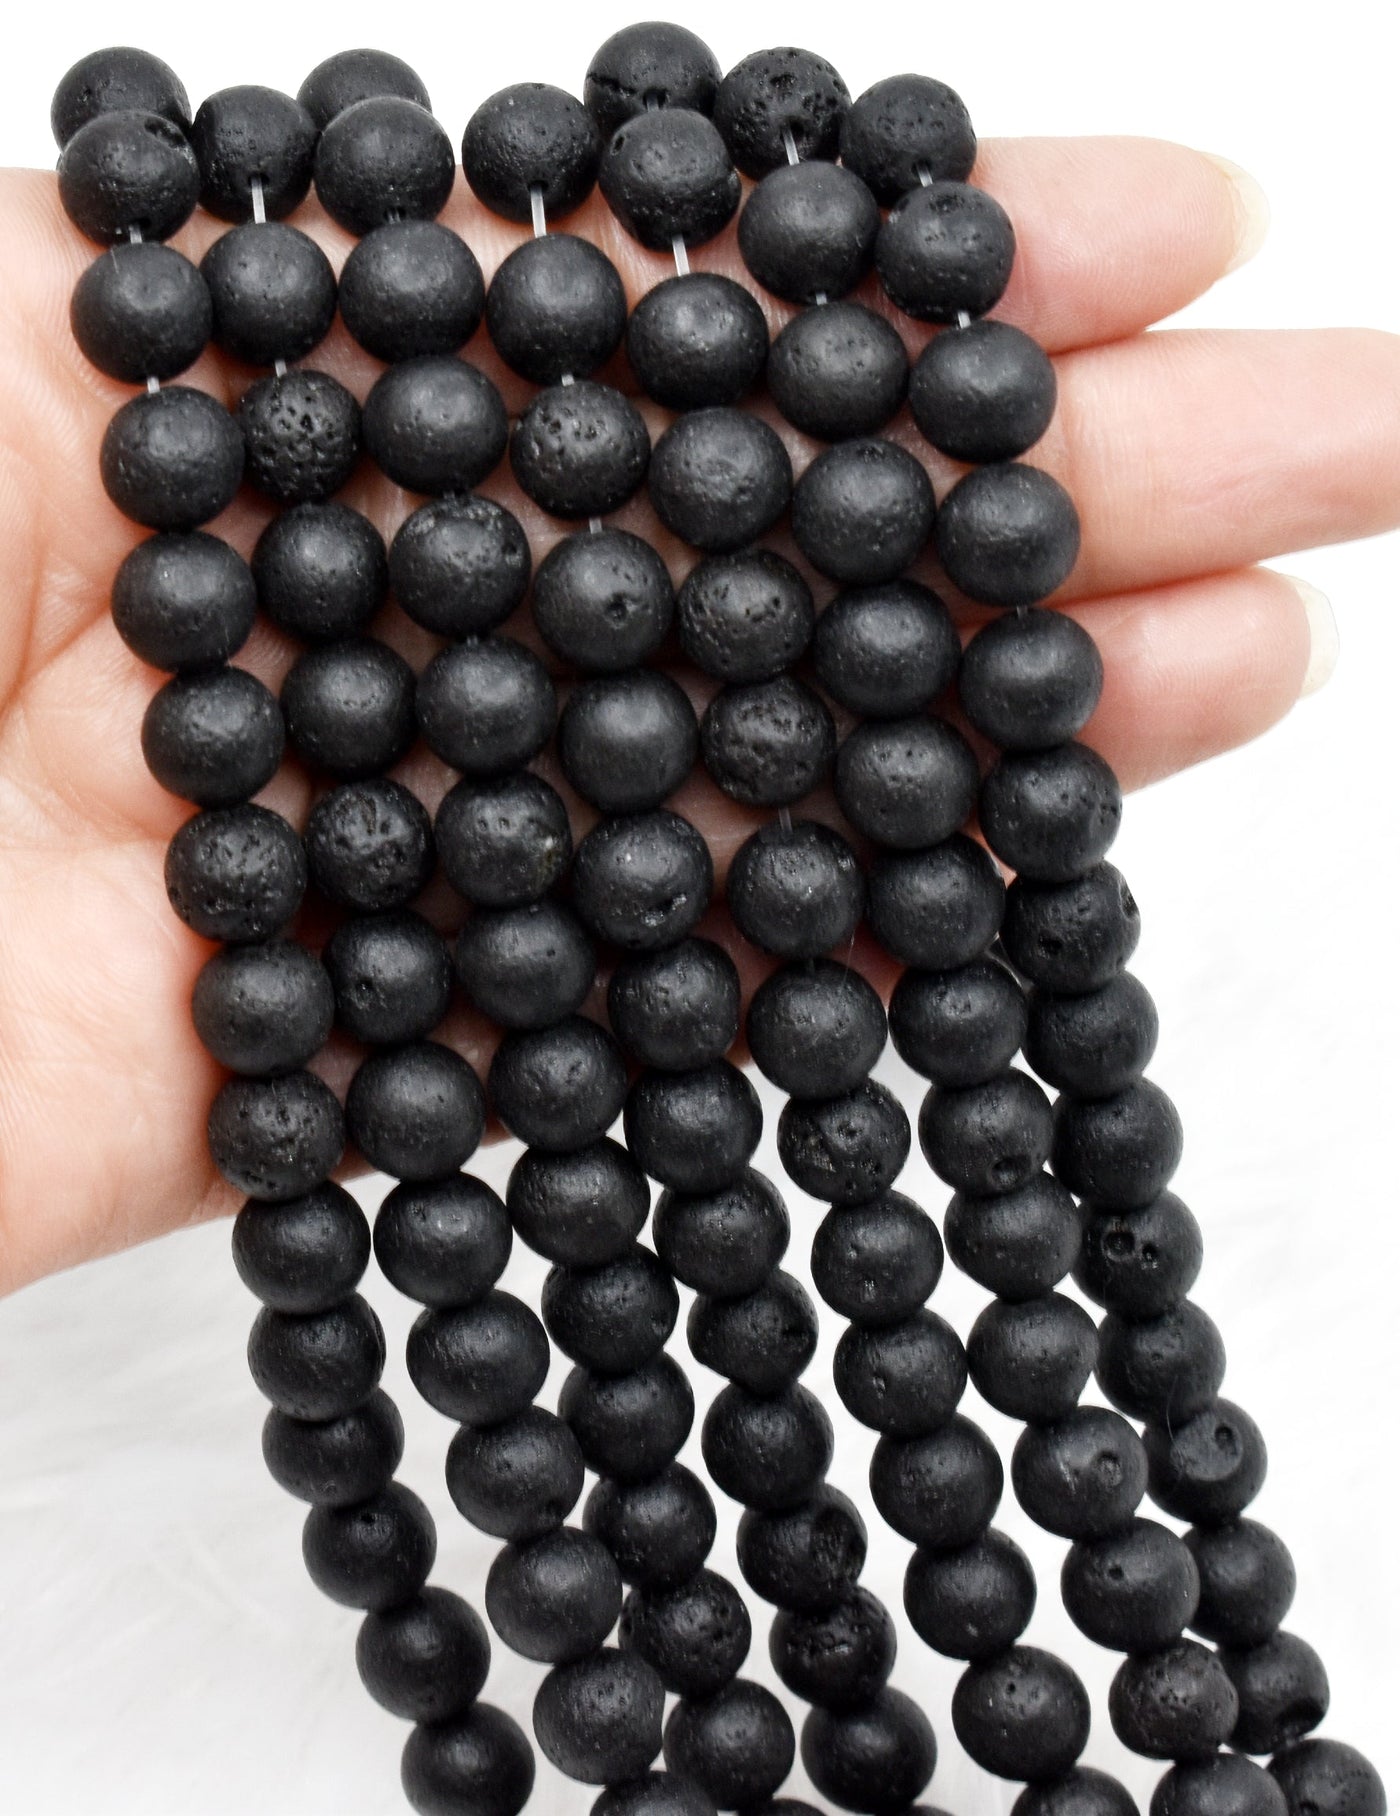 Lava Beads, Natural Round Crystal Beads 4mm to 12mm